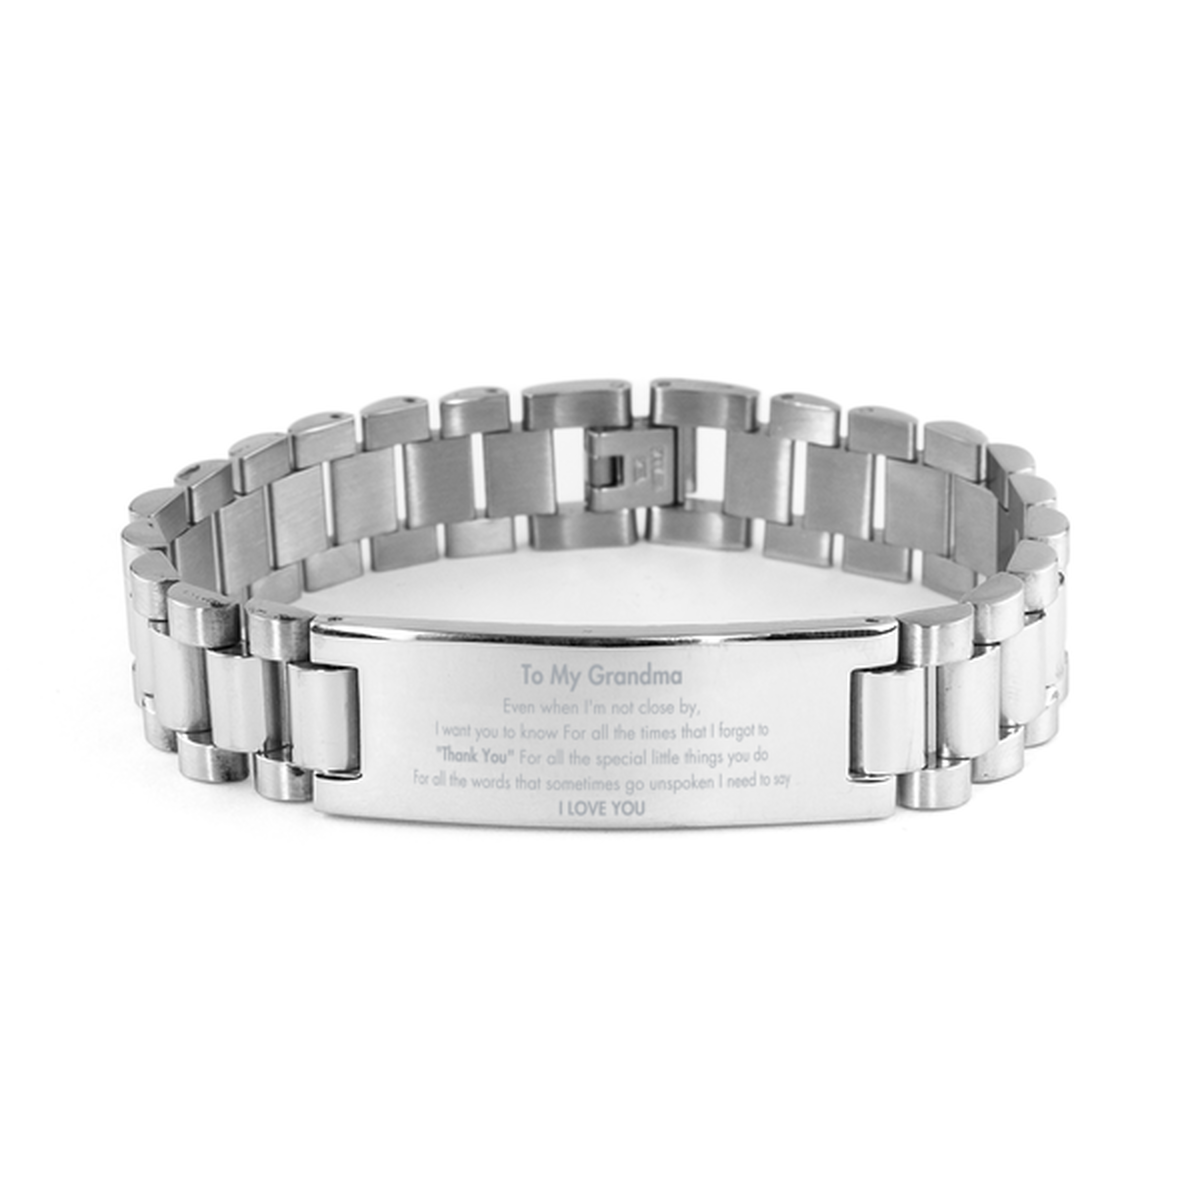 Thank You Gifts for Grandma, Keepsake Ladder Stainless Steel Bracelet Gifts for Grandma Birthday Mother's day Father's Day Grandma For all the words That sometimes go unspoken I need to say I LOVE YOU